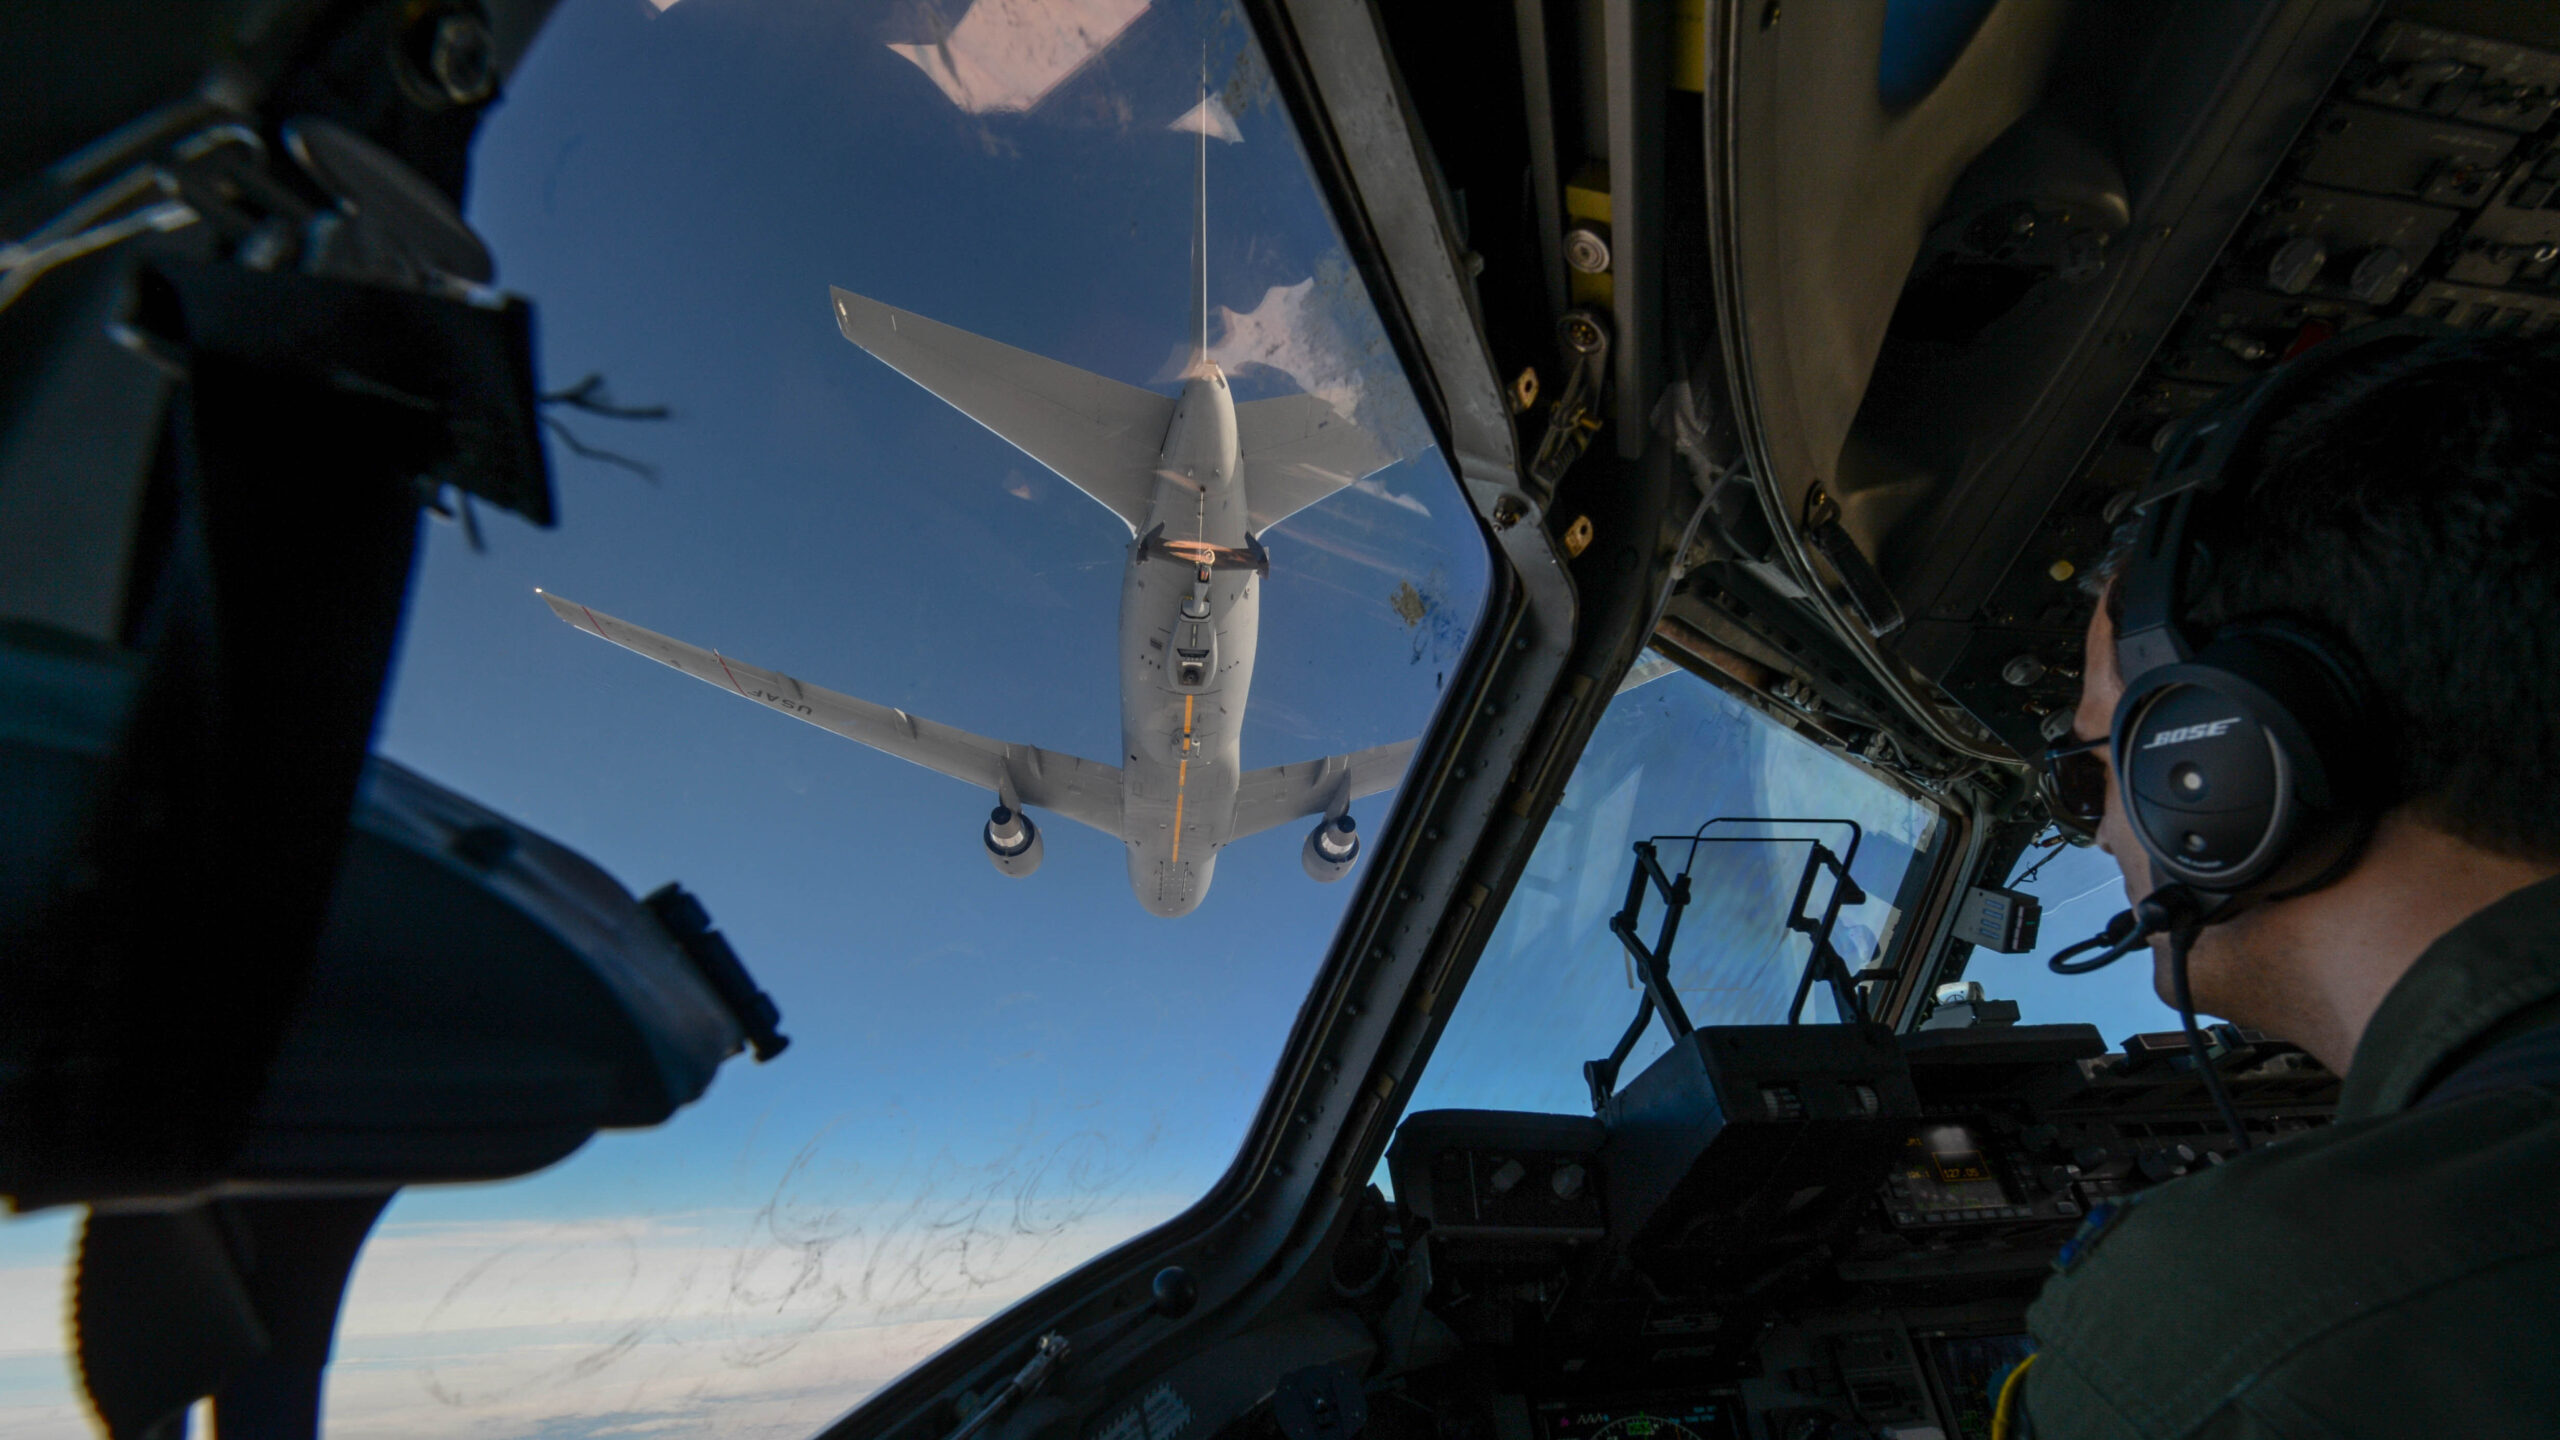 EXCLUSIVE: Boeing to pay for upgrades to KC-46 tanker’s panoramic system